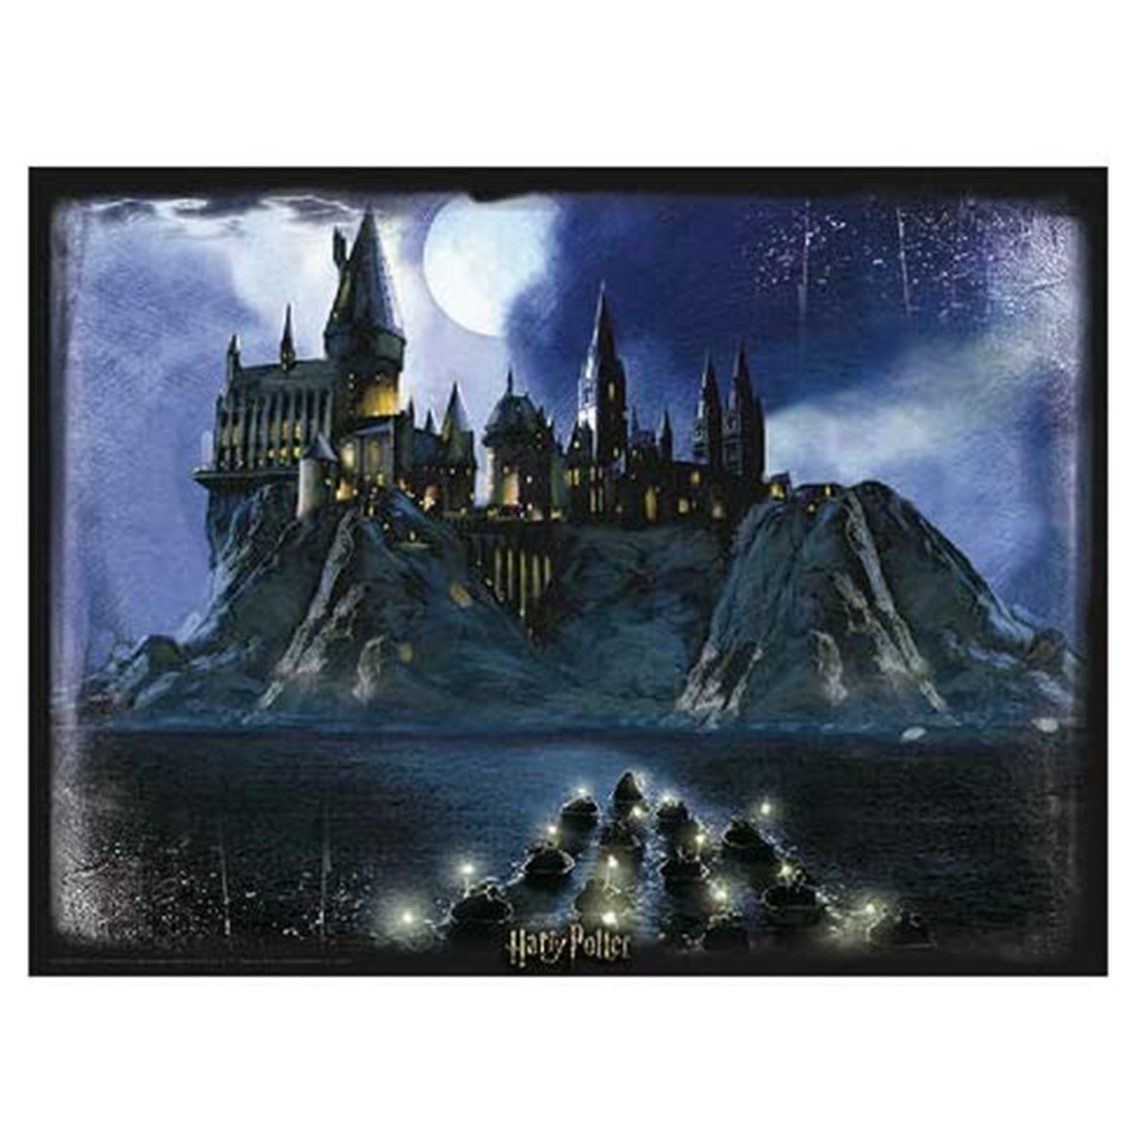 670889325152-PN-Cod.-Articulo-MGS0000001499-Puzzle-3d-lenticular-harry-potter-hogwarts-500-piezas-1